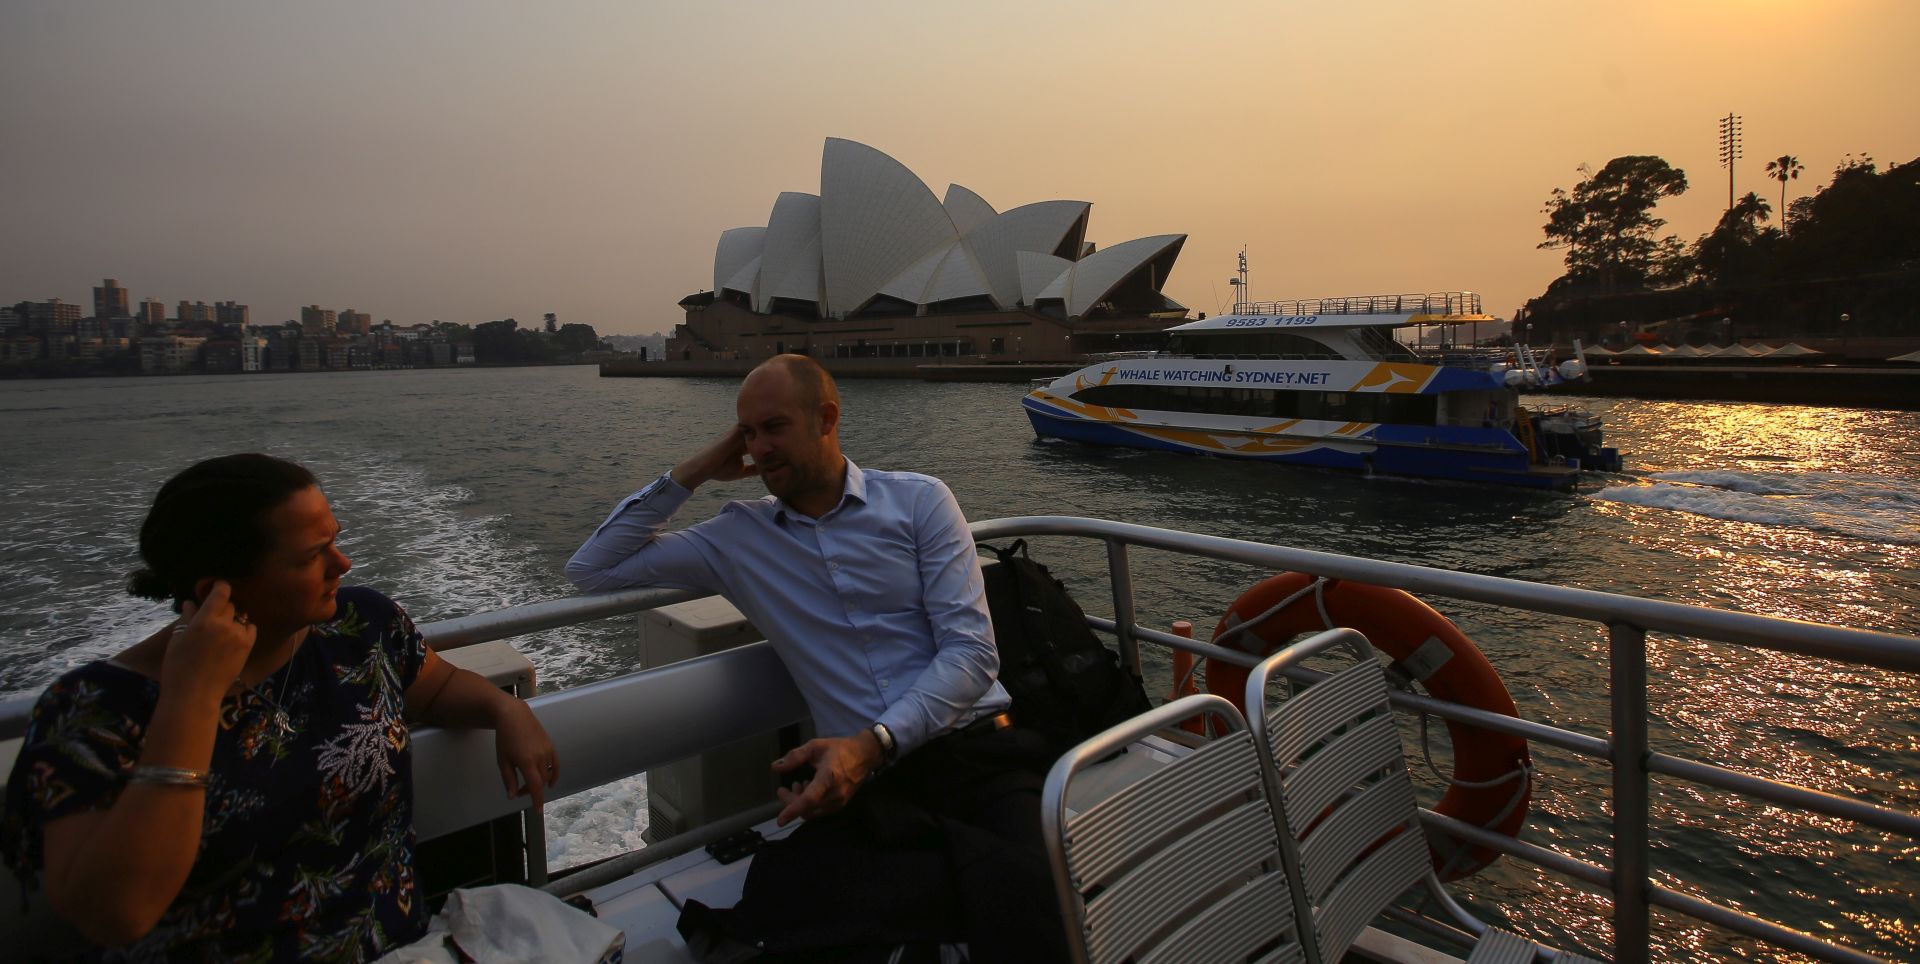 epa08080545 The Sydney Opera House is seen as commuters ride the Manly Ferry during a day of predicted hot weather in Sydney, Australia, 19 December 2019. Sydney, Adelaide, and Canberra are all forecast to hit 40C following the hottest Australian day on record a day earlier.  EPA/STEVEN SAPHORE  AUSTRALIA AND NEW ZEALAND OUT